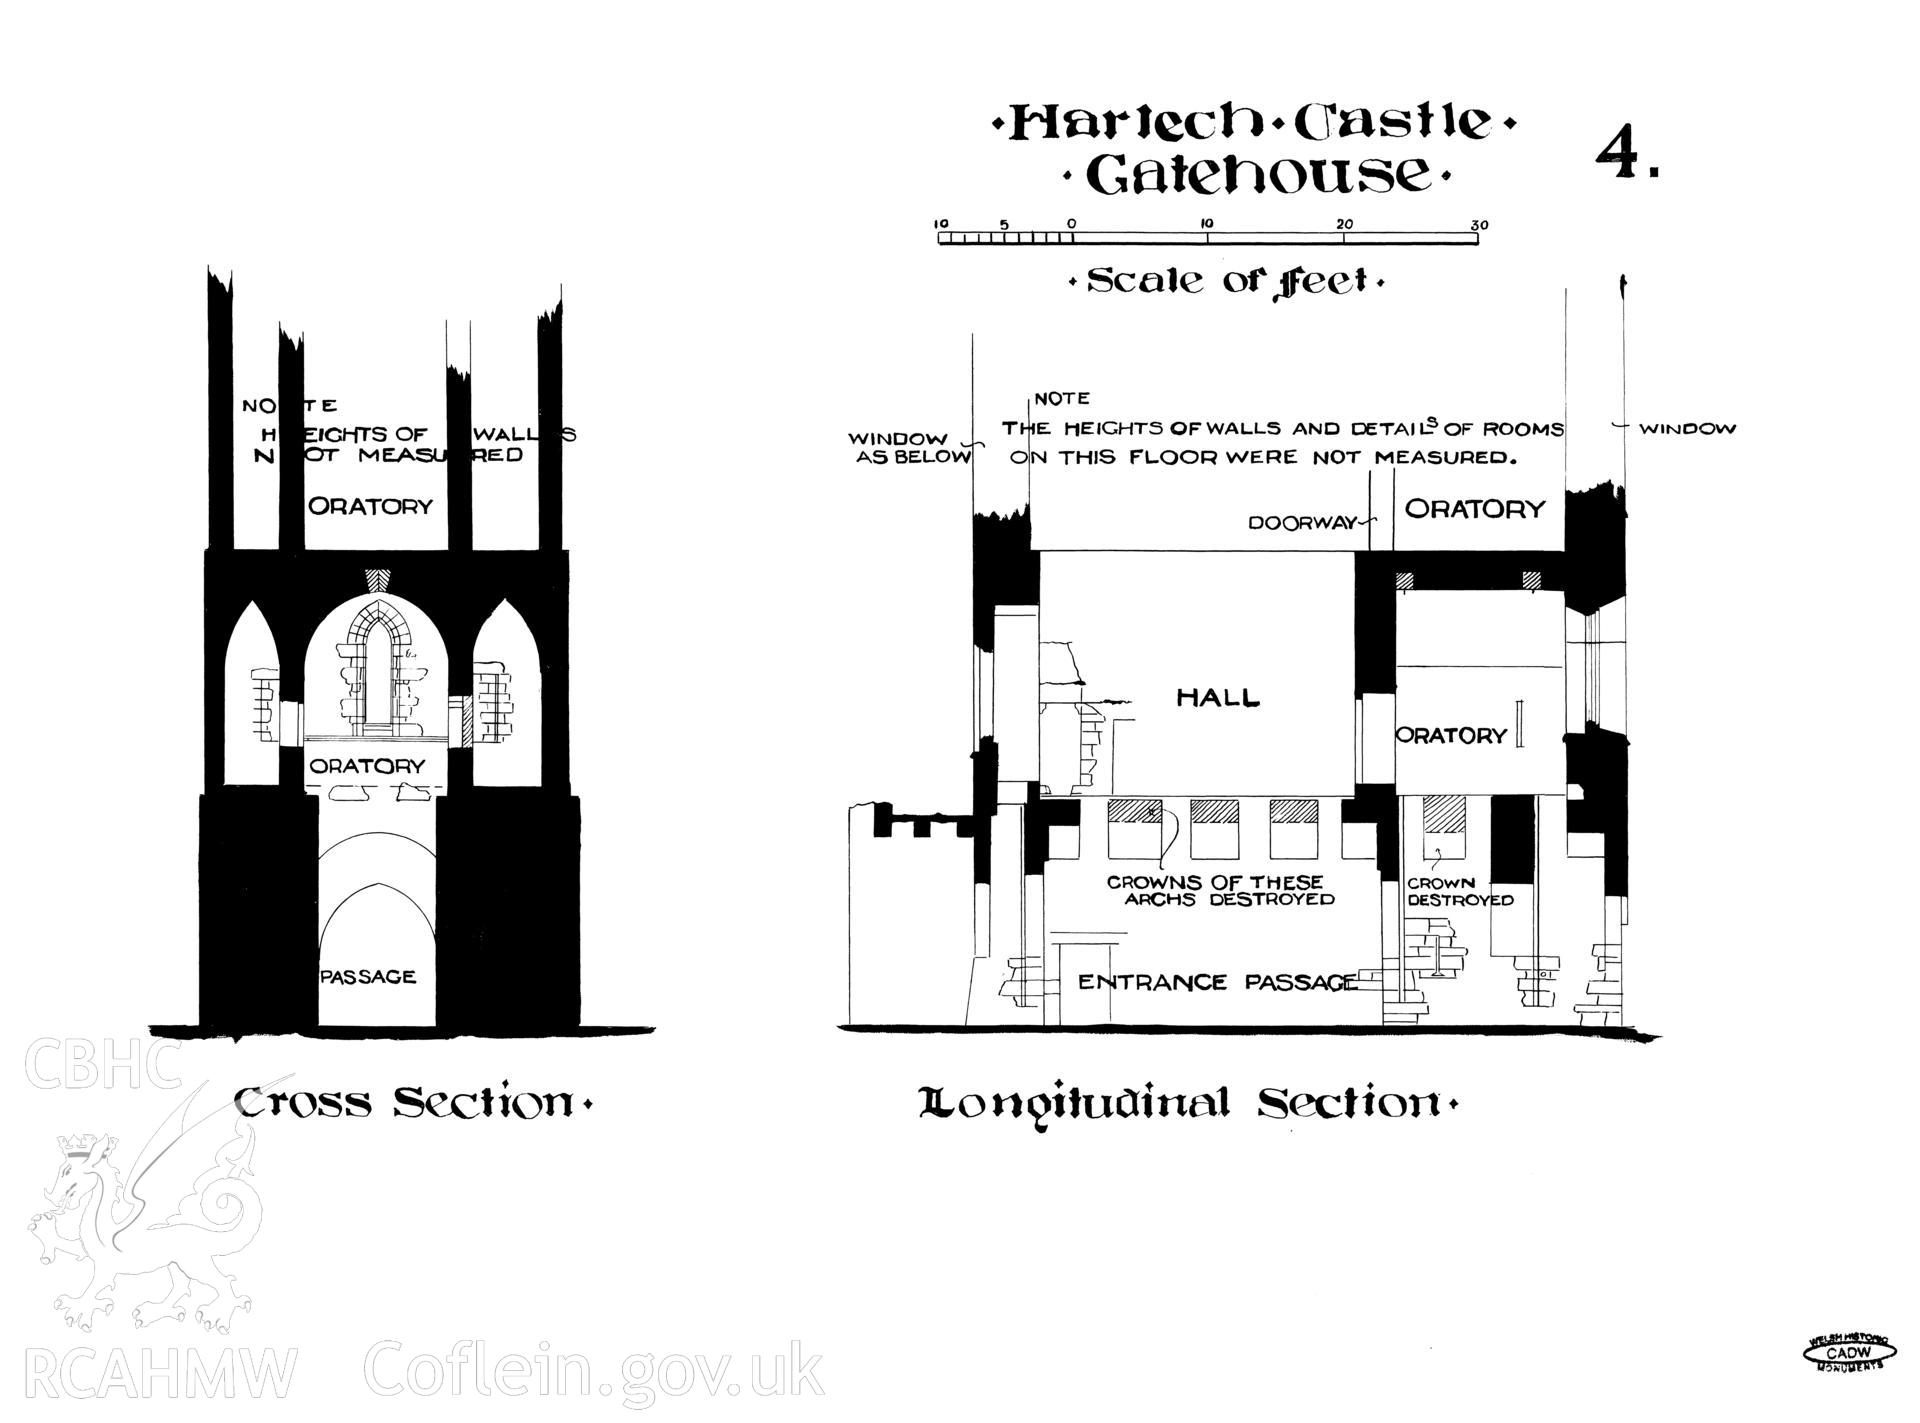 Cadw guardianship monument drawing of Harlech Castle. Gatehouse, X section + long. section. Cadw Ref:86//75. Scale 1:30.